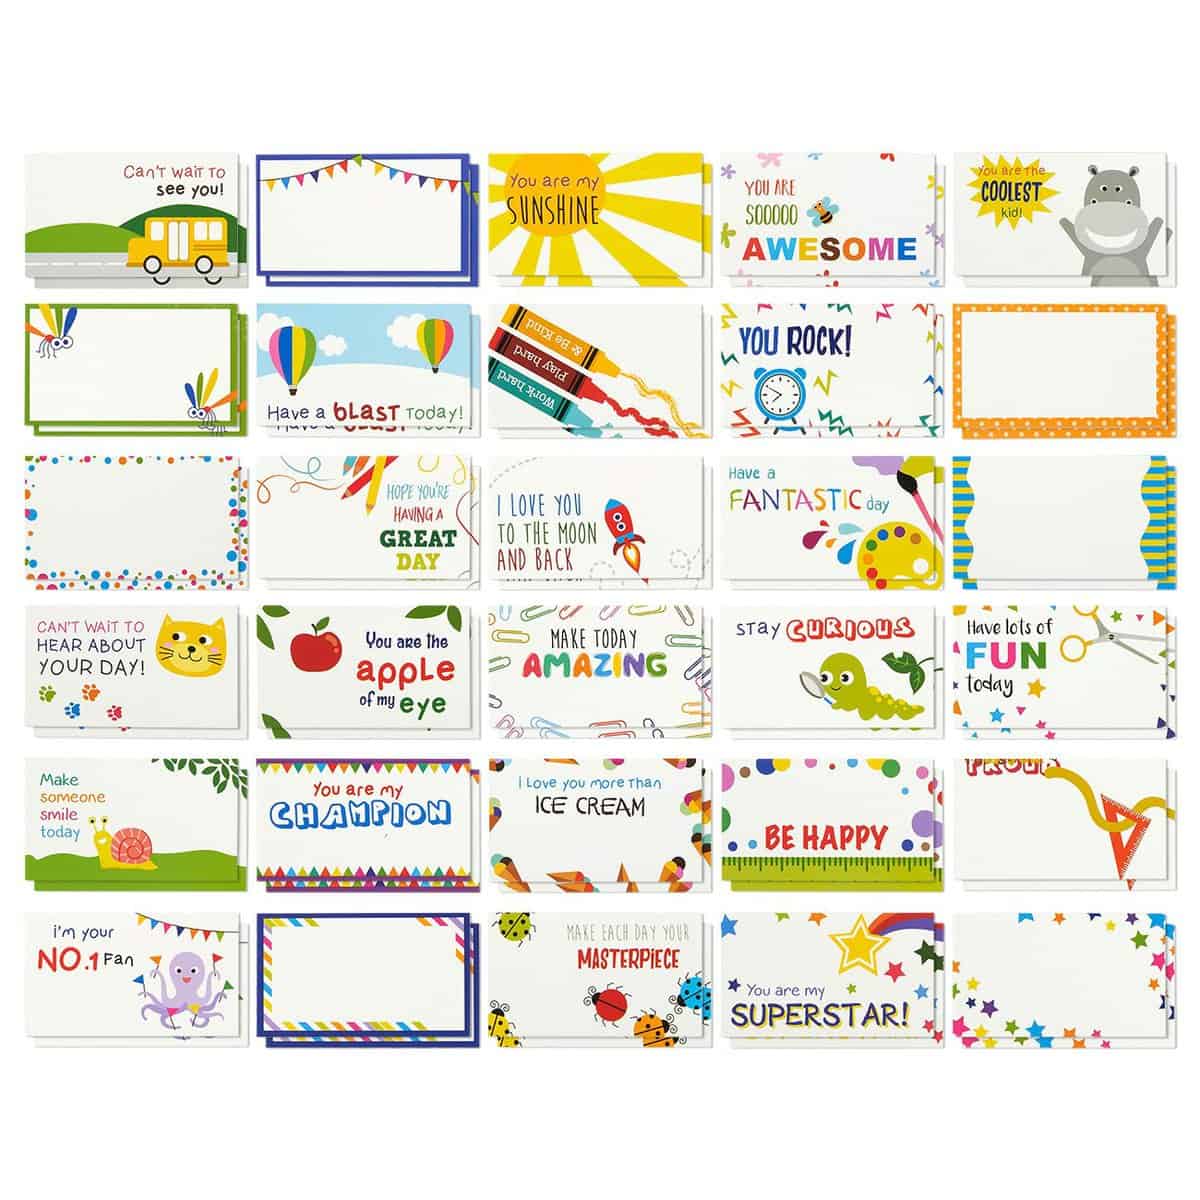 60 encouraging and positive Lunch Box Notes to put in kids lunch boxes.